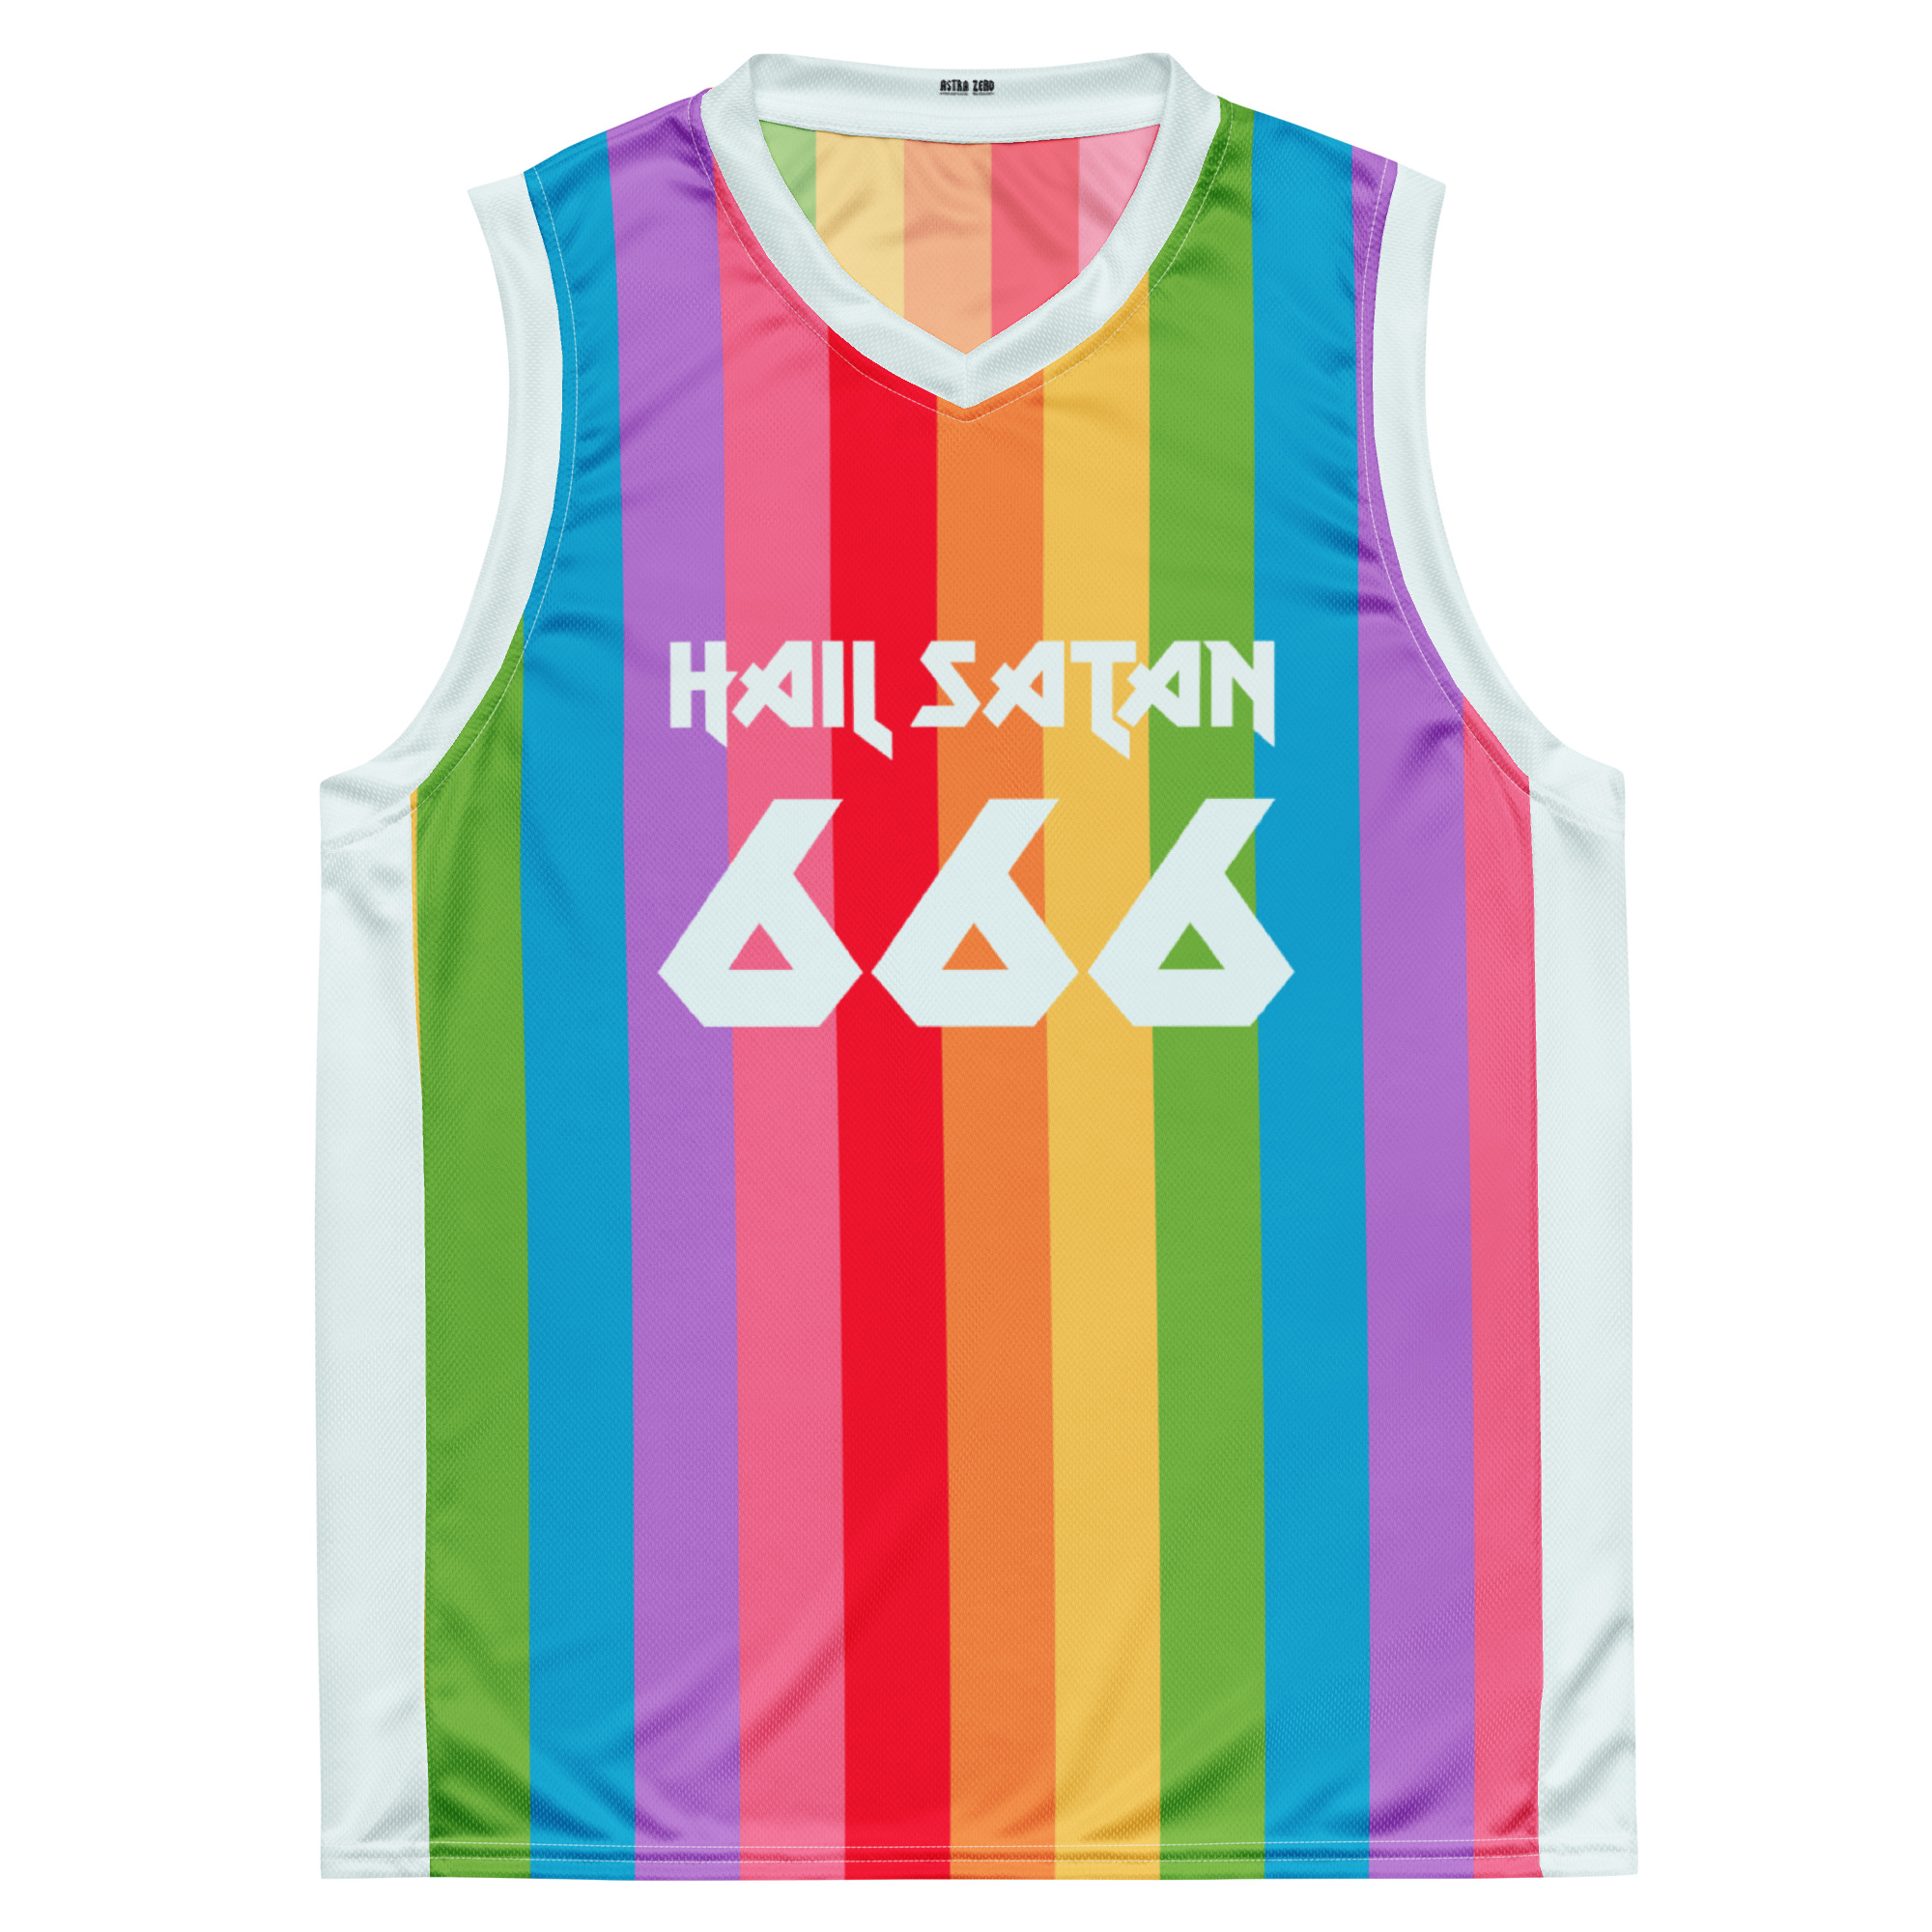 Featured image for “Rainbow Hail Satan - Recycled unisex basketball jersey”